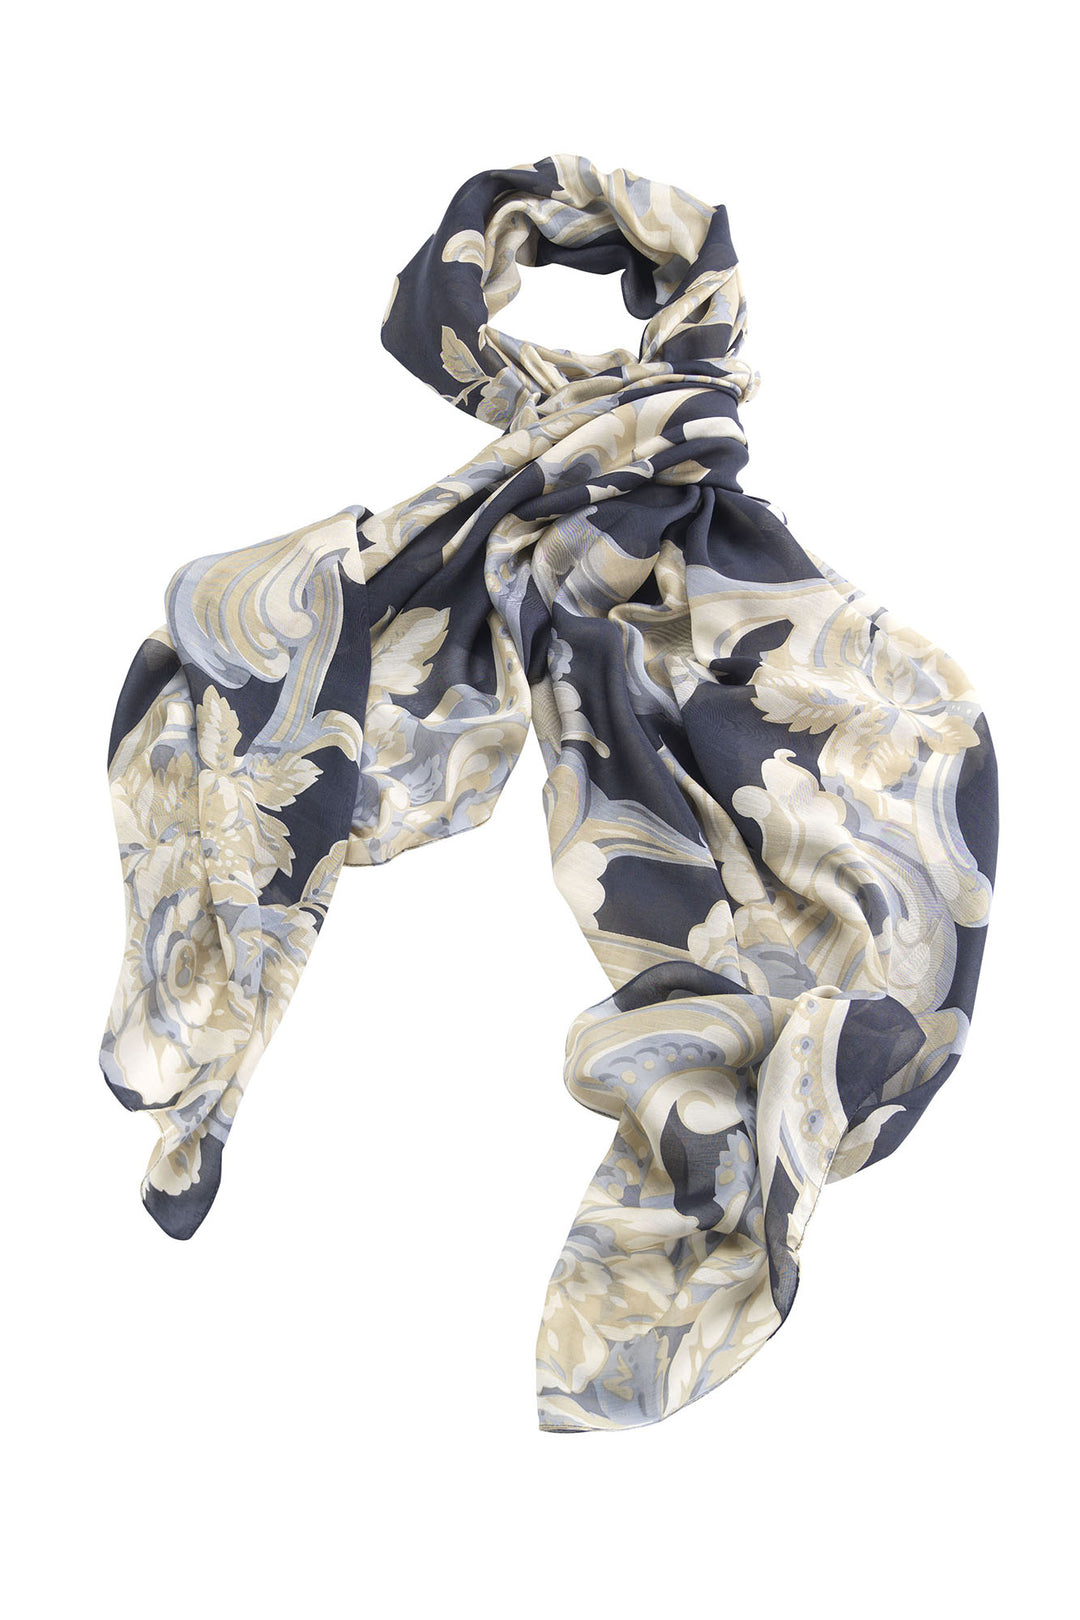 One Hundred Stars Plaster Roses Midnight Scarf- Our scarves are a full 100cm x 200cm making them perfect for layering in the winter months or worn as a delicate cover up during the summer seasons. 